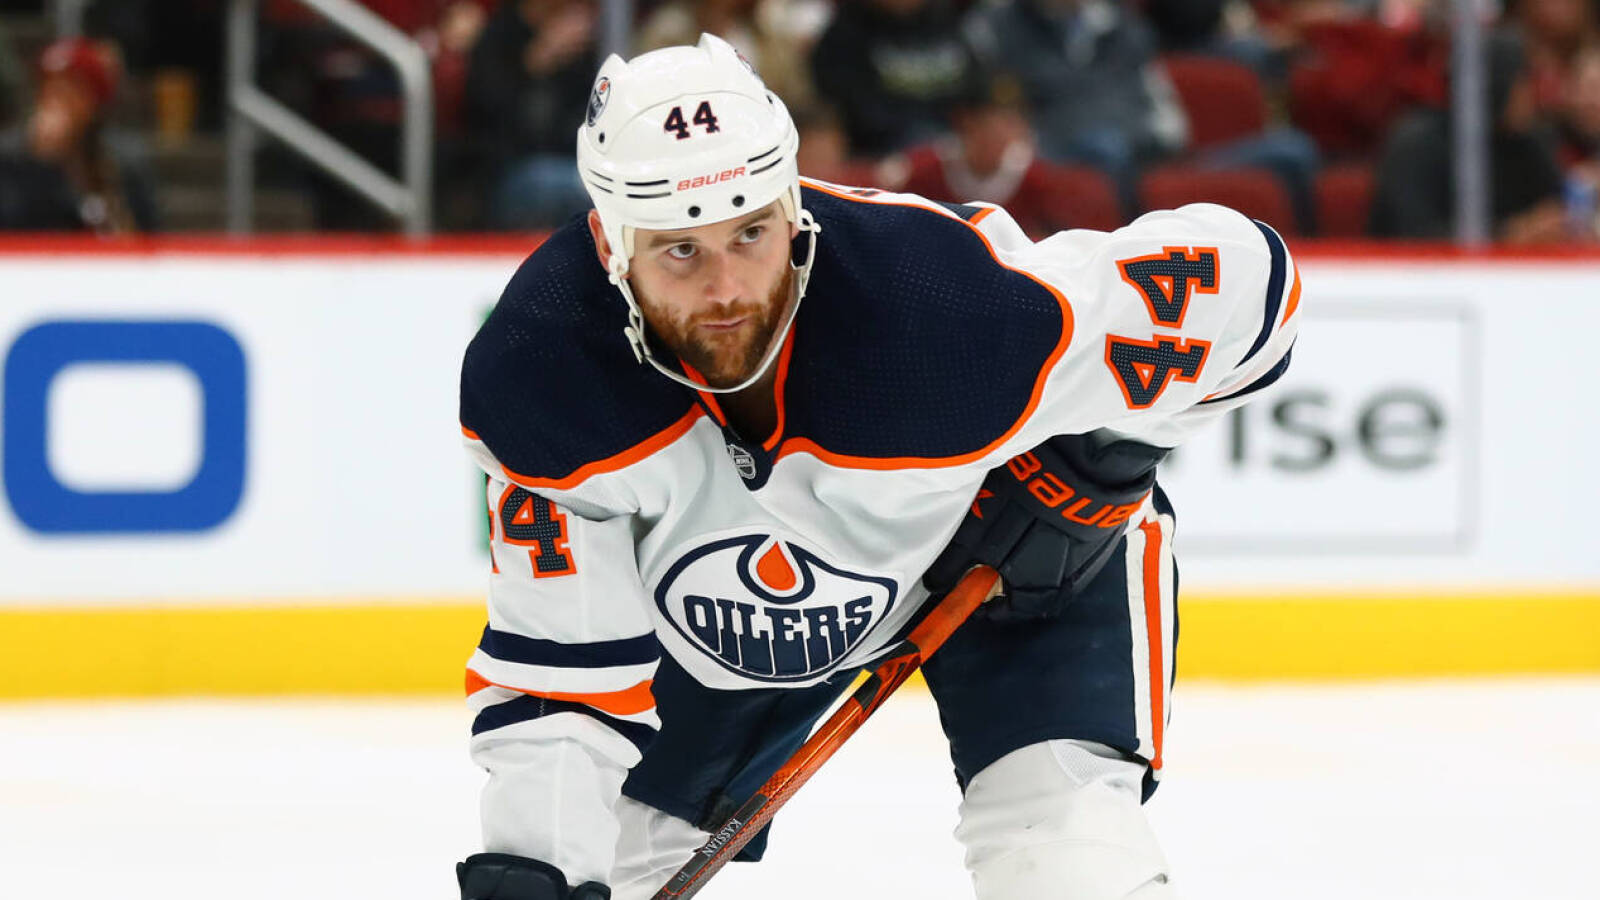 Former Oilers' Kassian Is Being Bought Out, Should They Bring Him